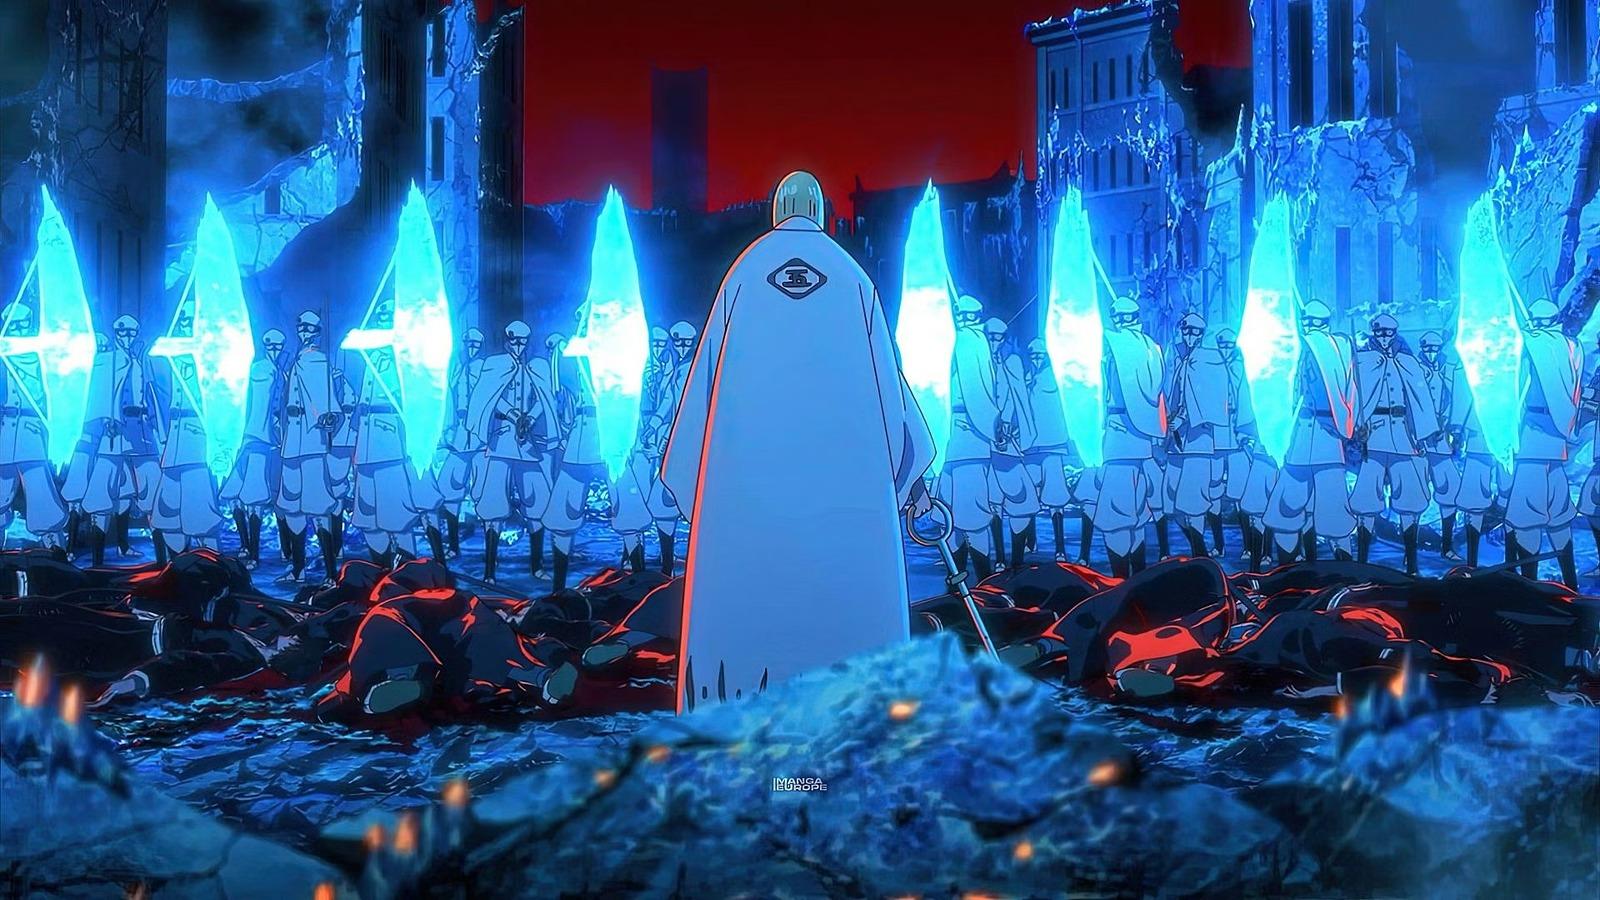 Bleach Creator Teases Original Battle Coming to Anime in Second Cour of  Thousand-Year Blood War